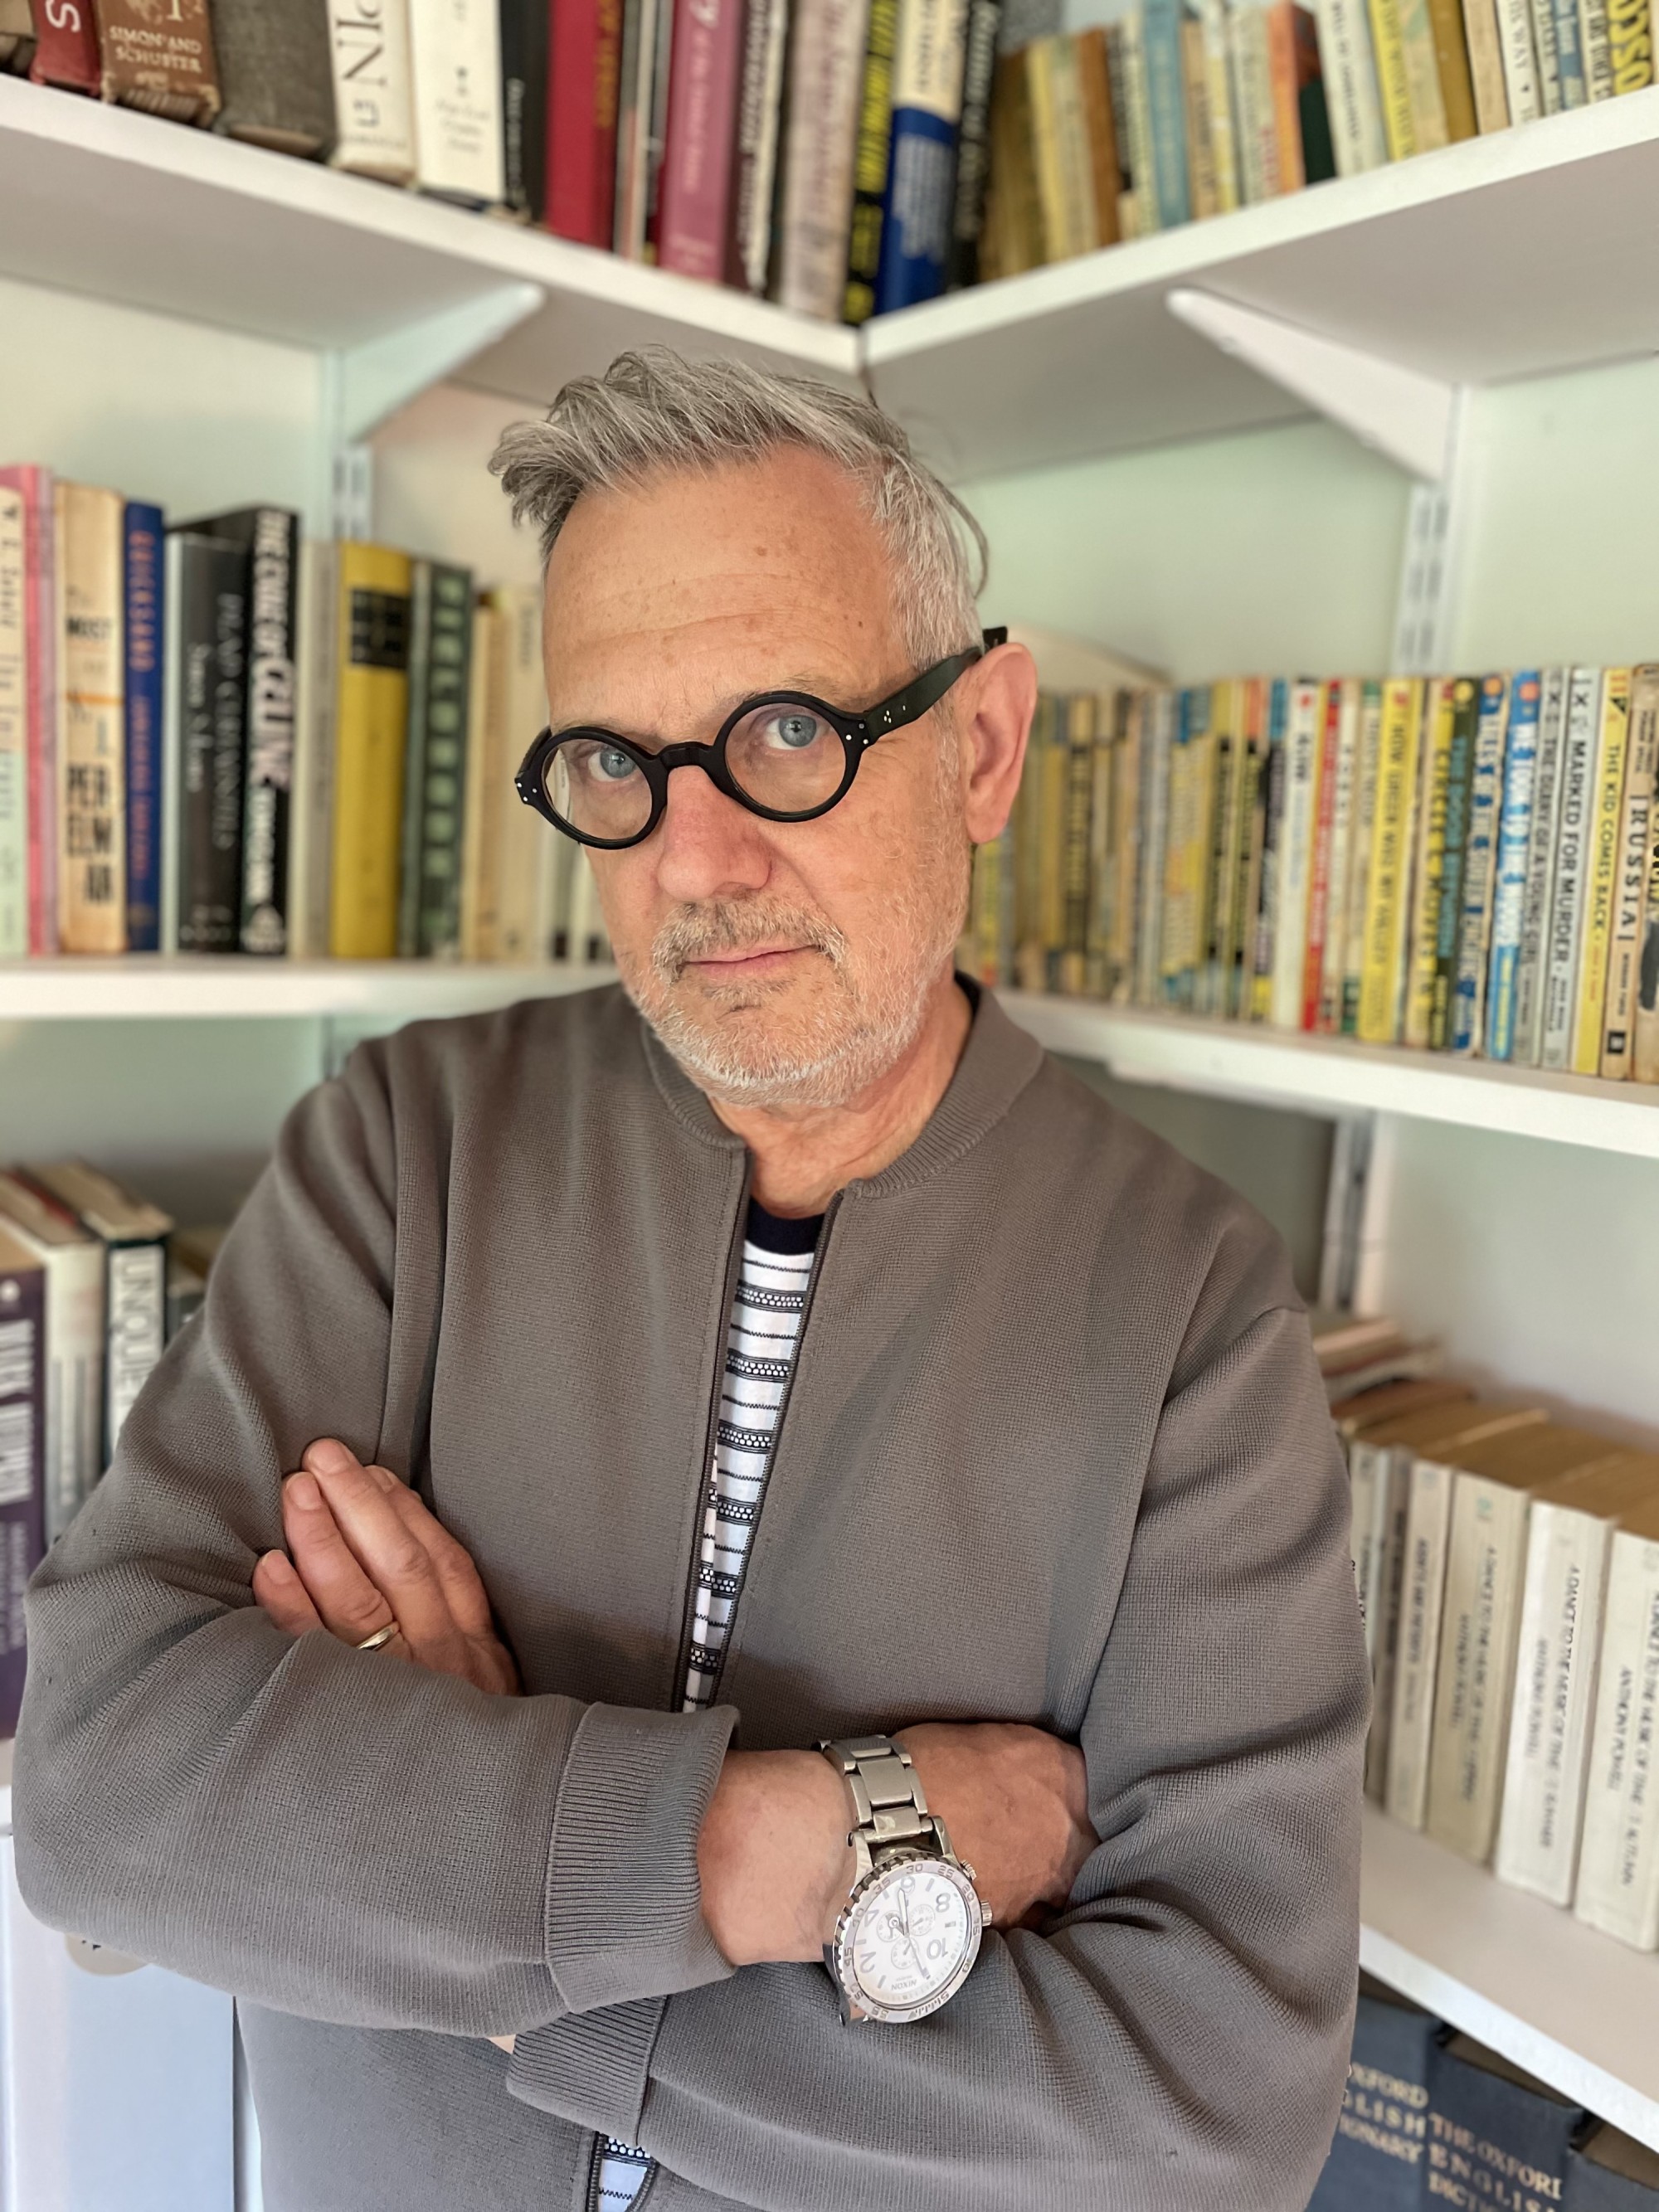 Michael Gottlieb stands with his arms crossed at a corner where two bookshelves meet, wearing a gray jacket and black glasses